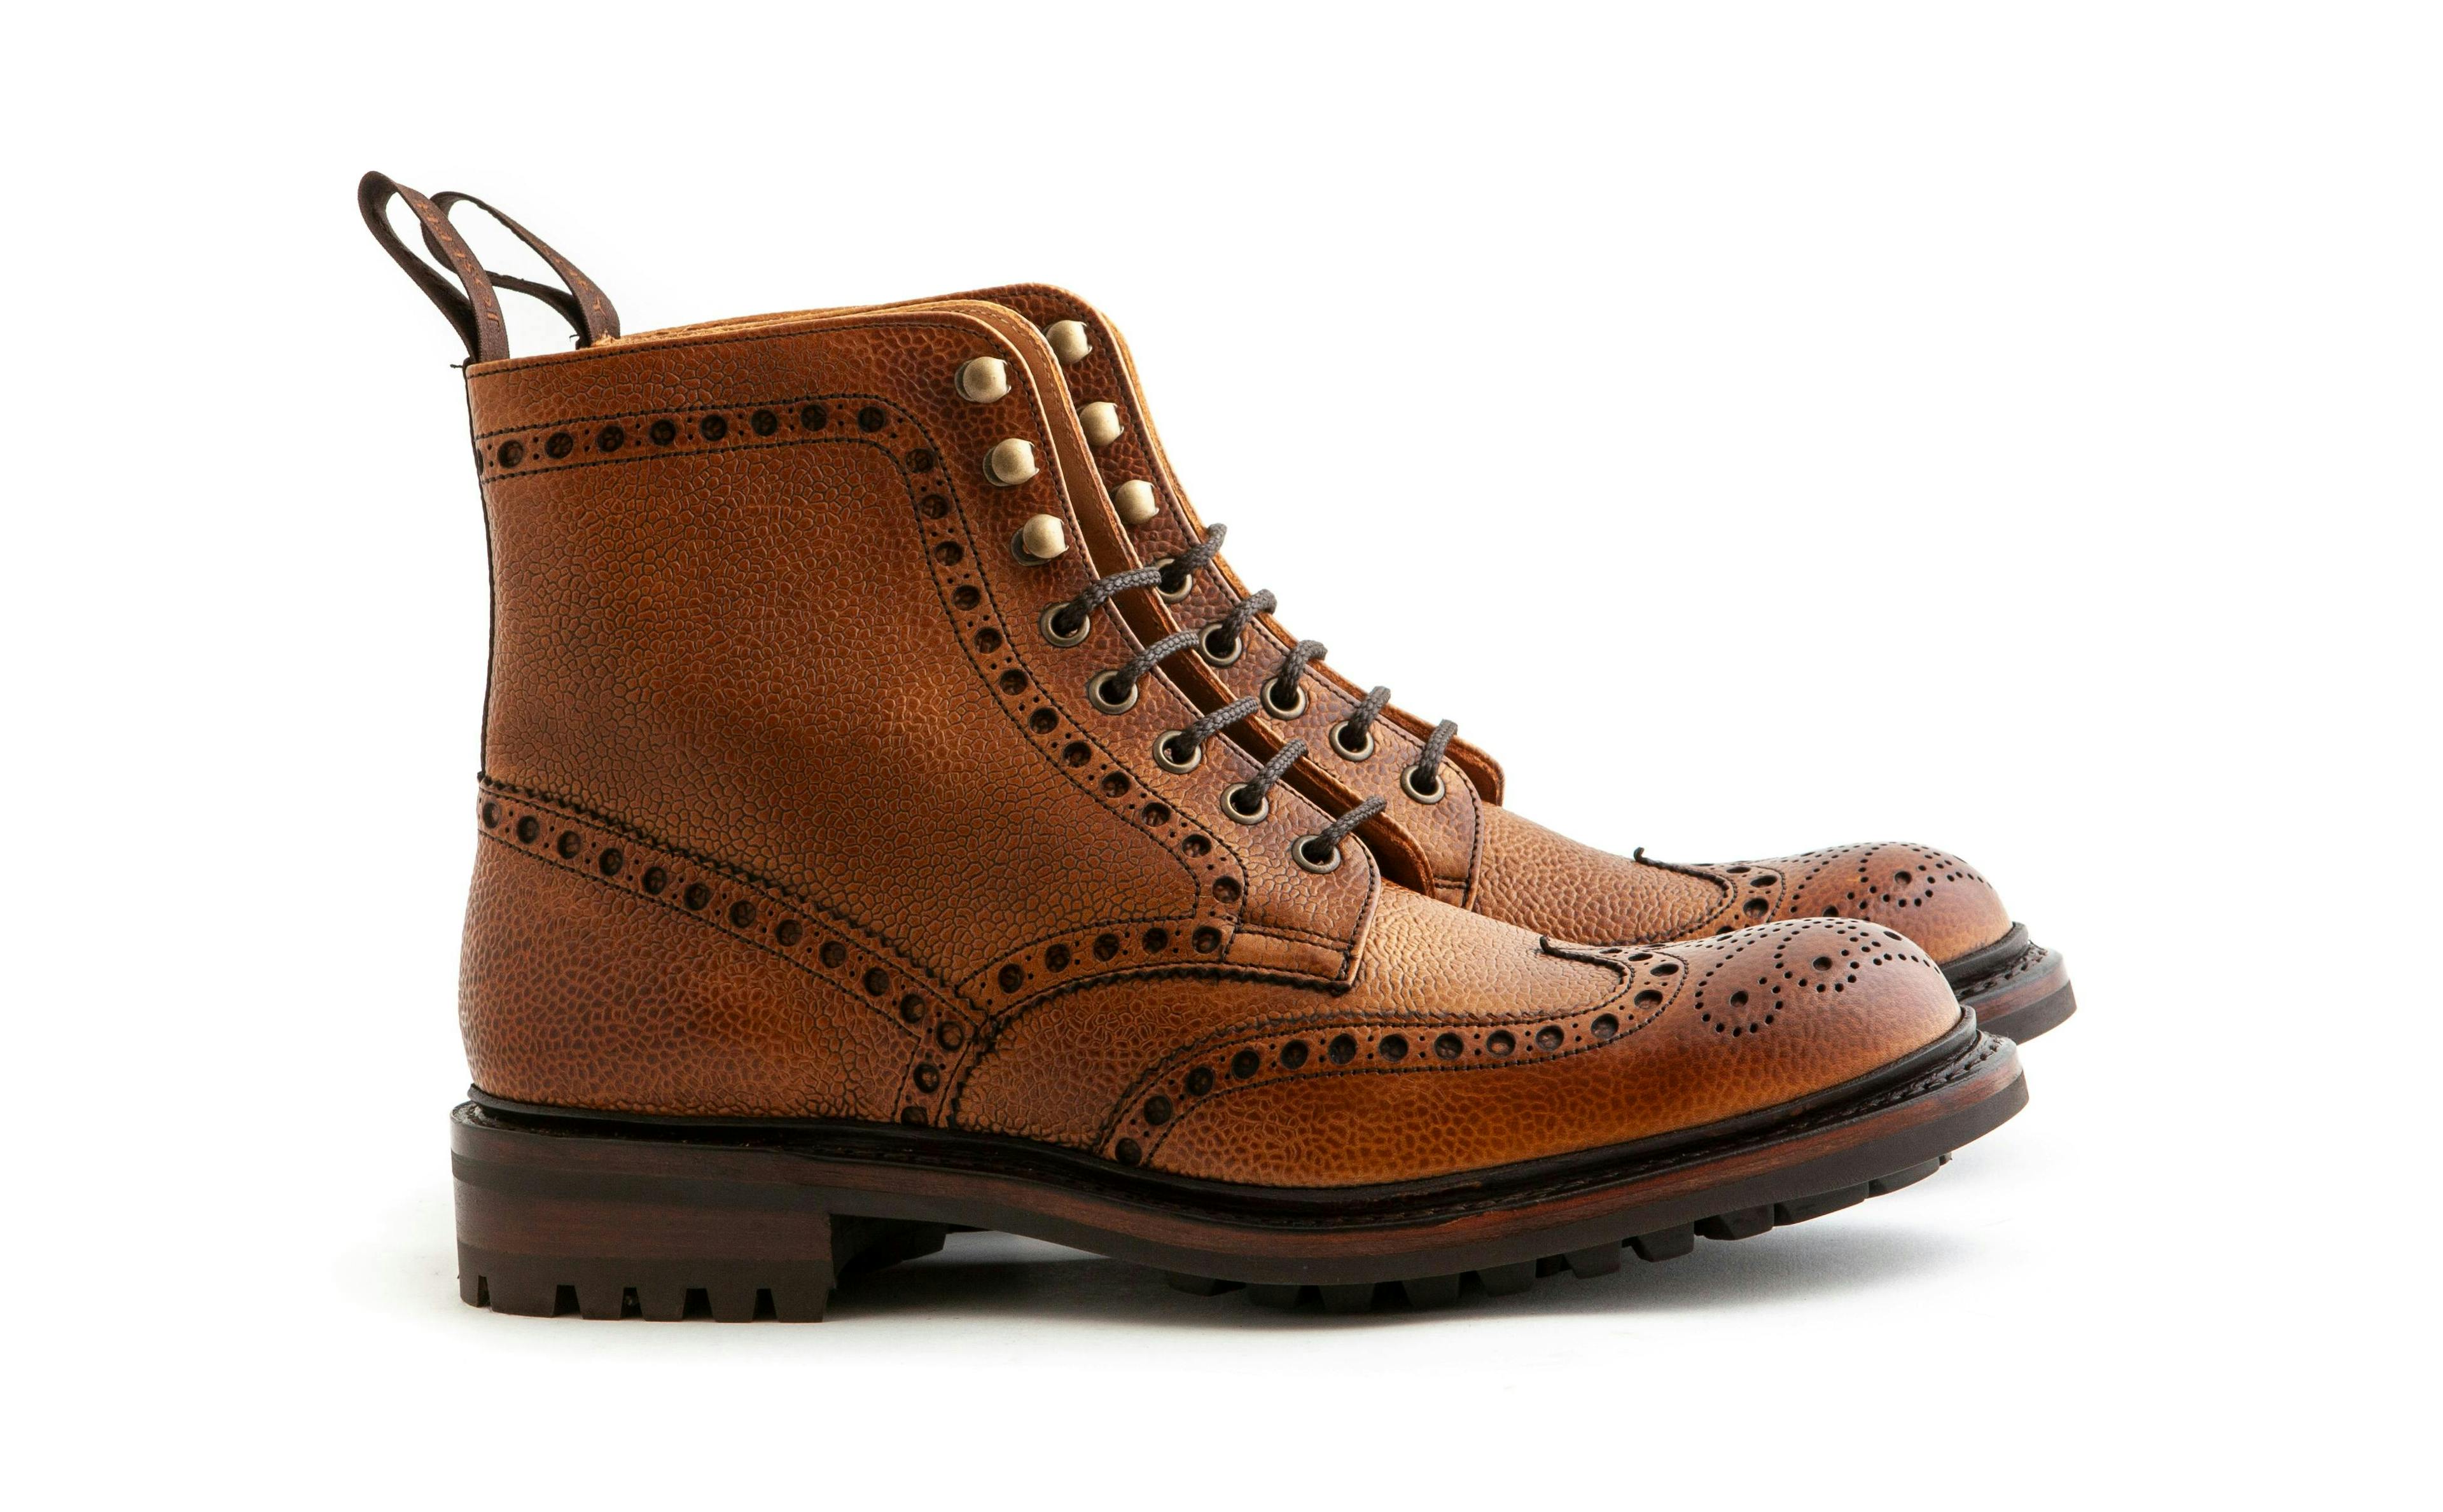 Side view of the Cheaney Tweed R in almond grain calf.